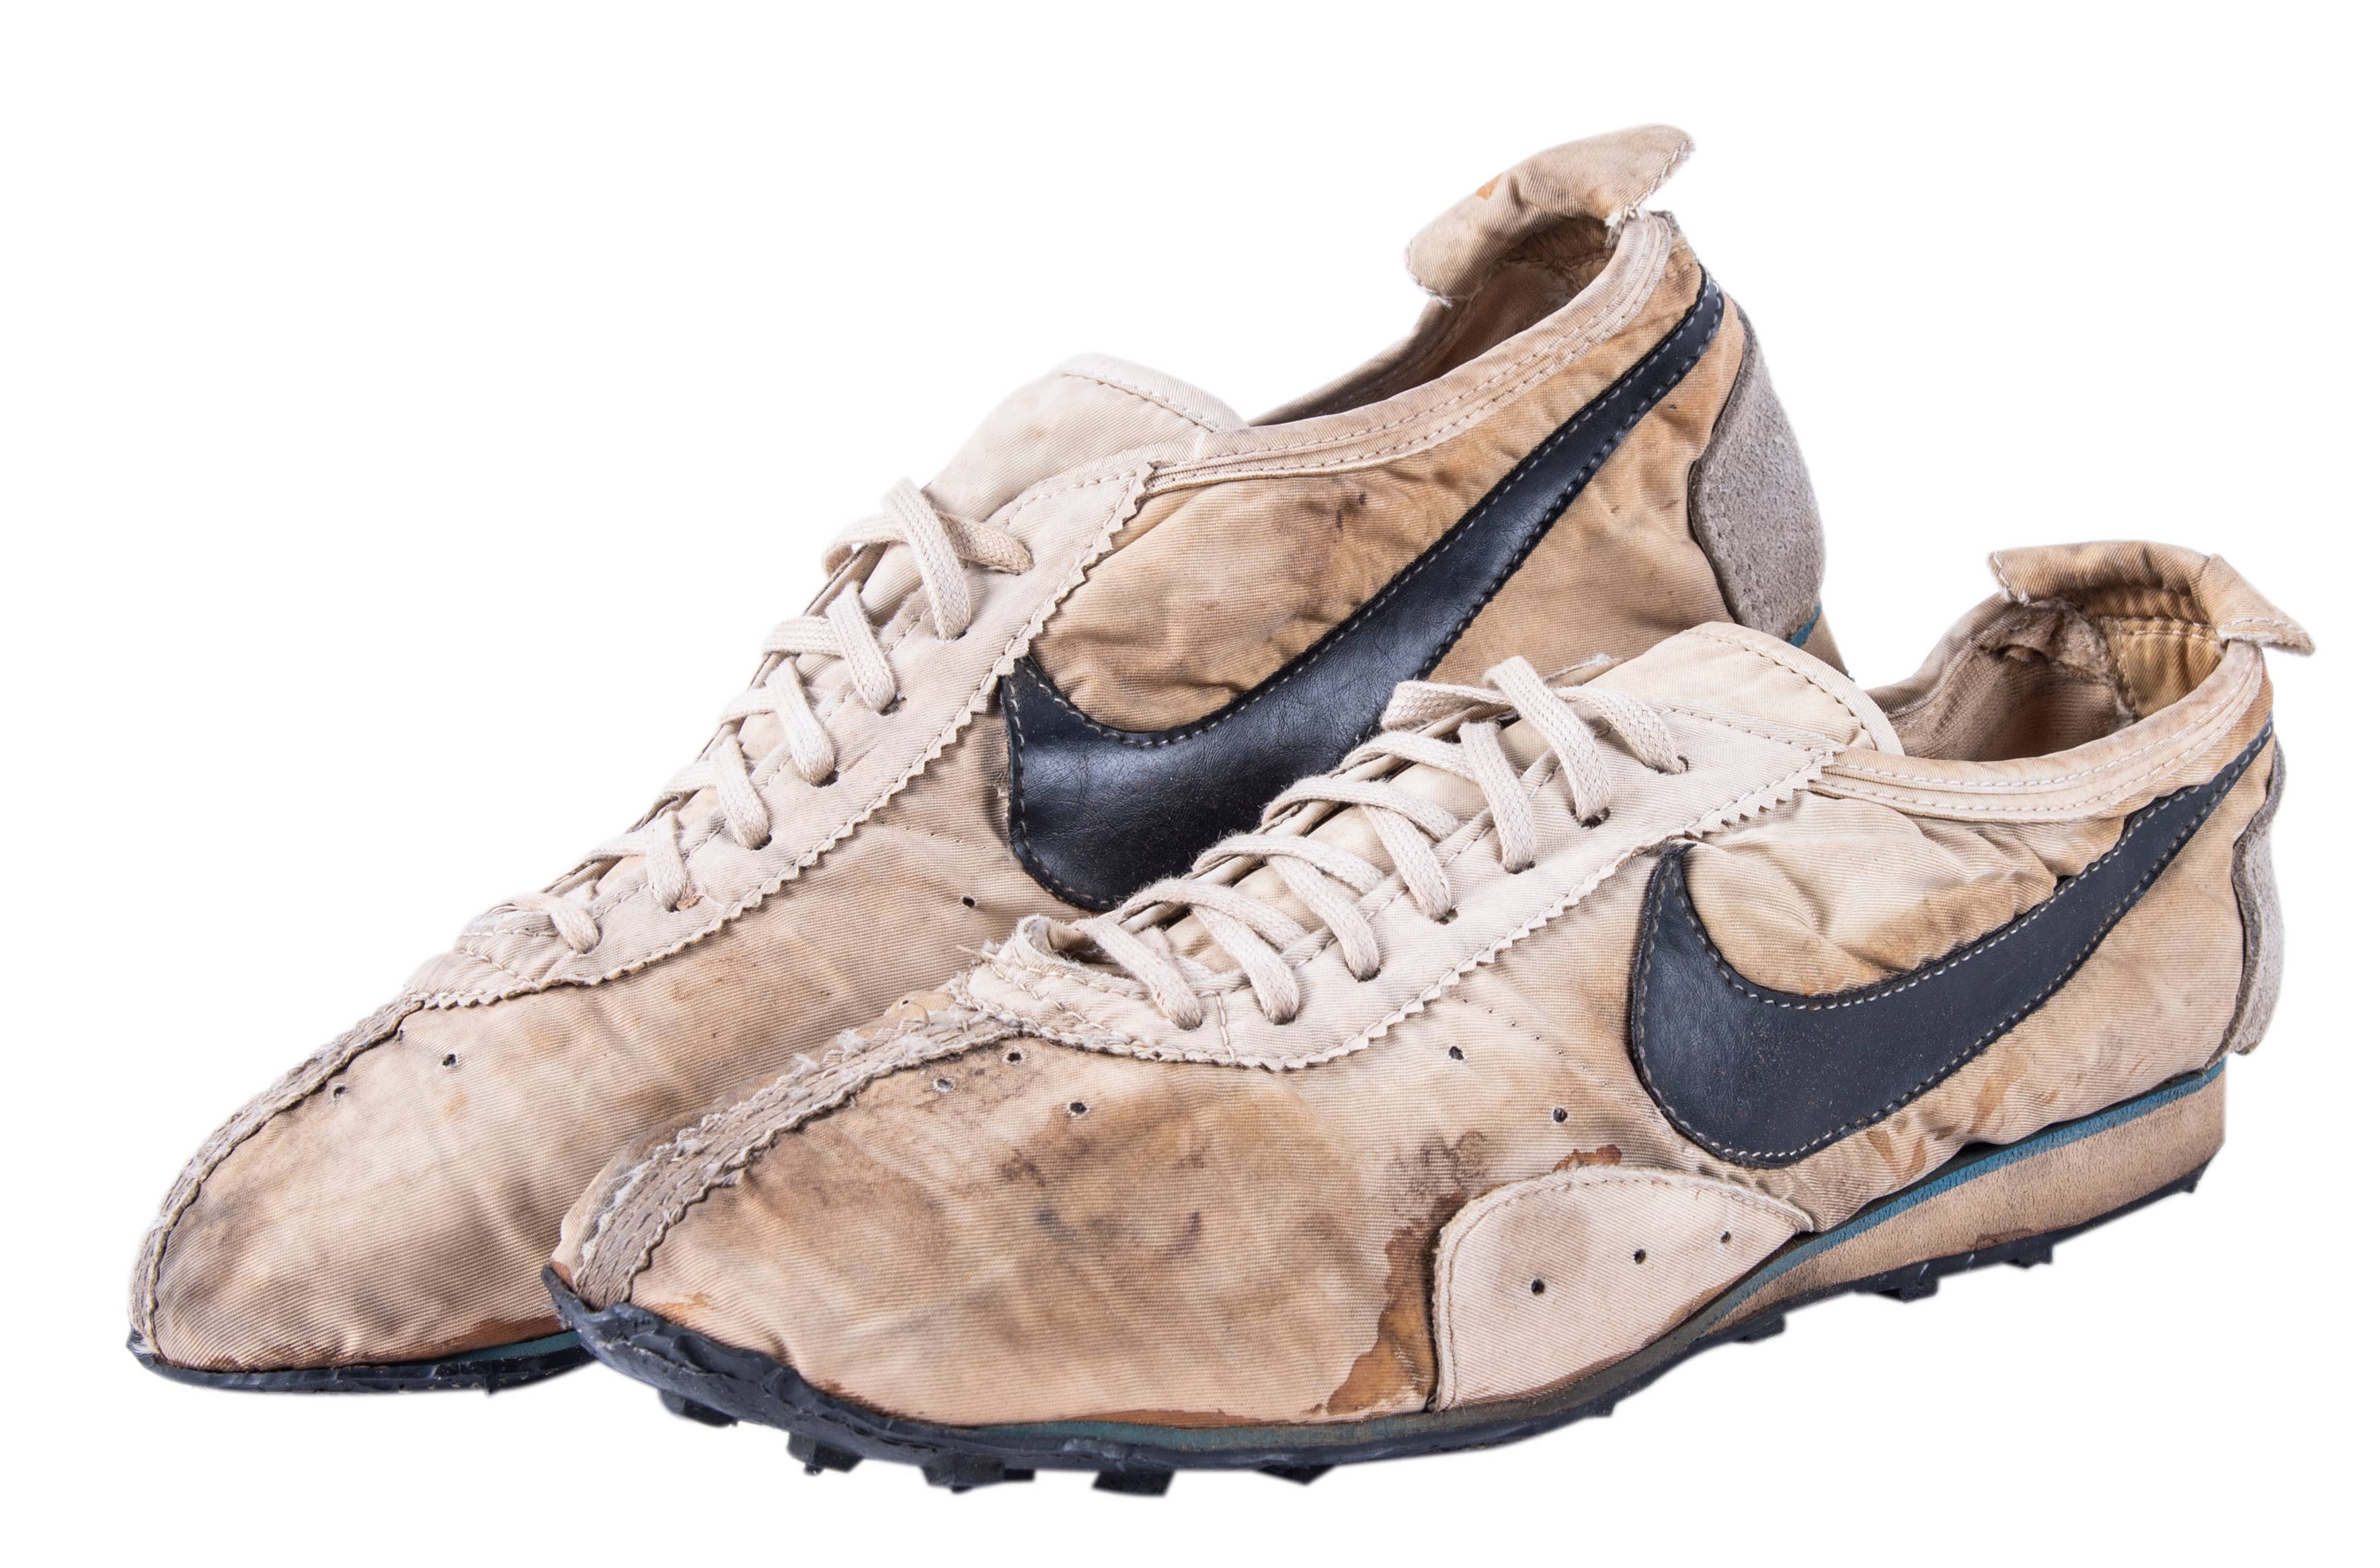 nike moon shoes goldin auctions lateral